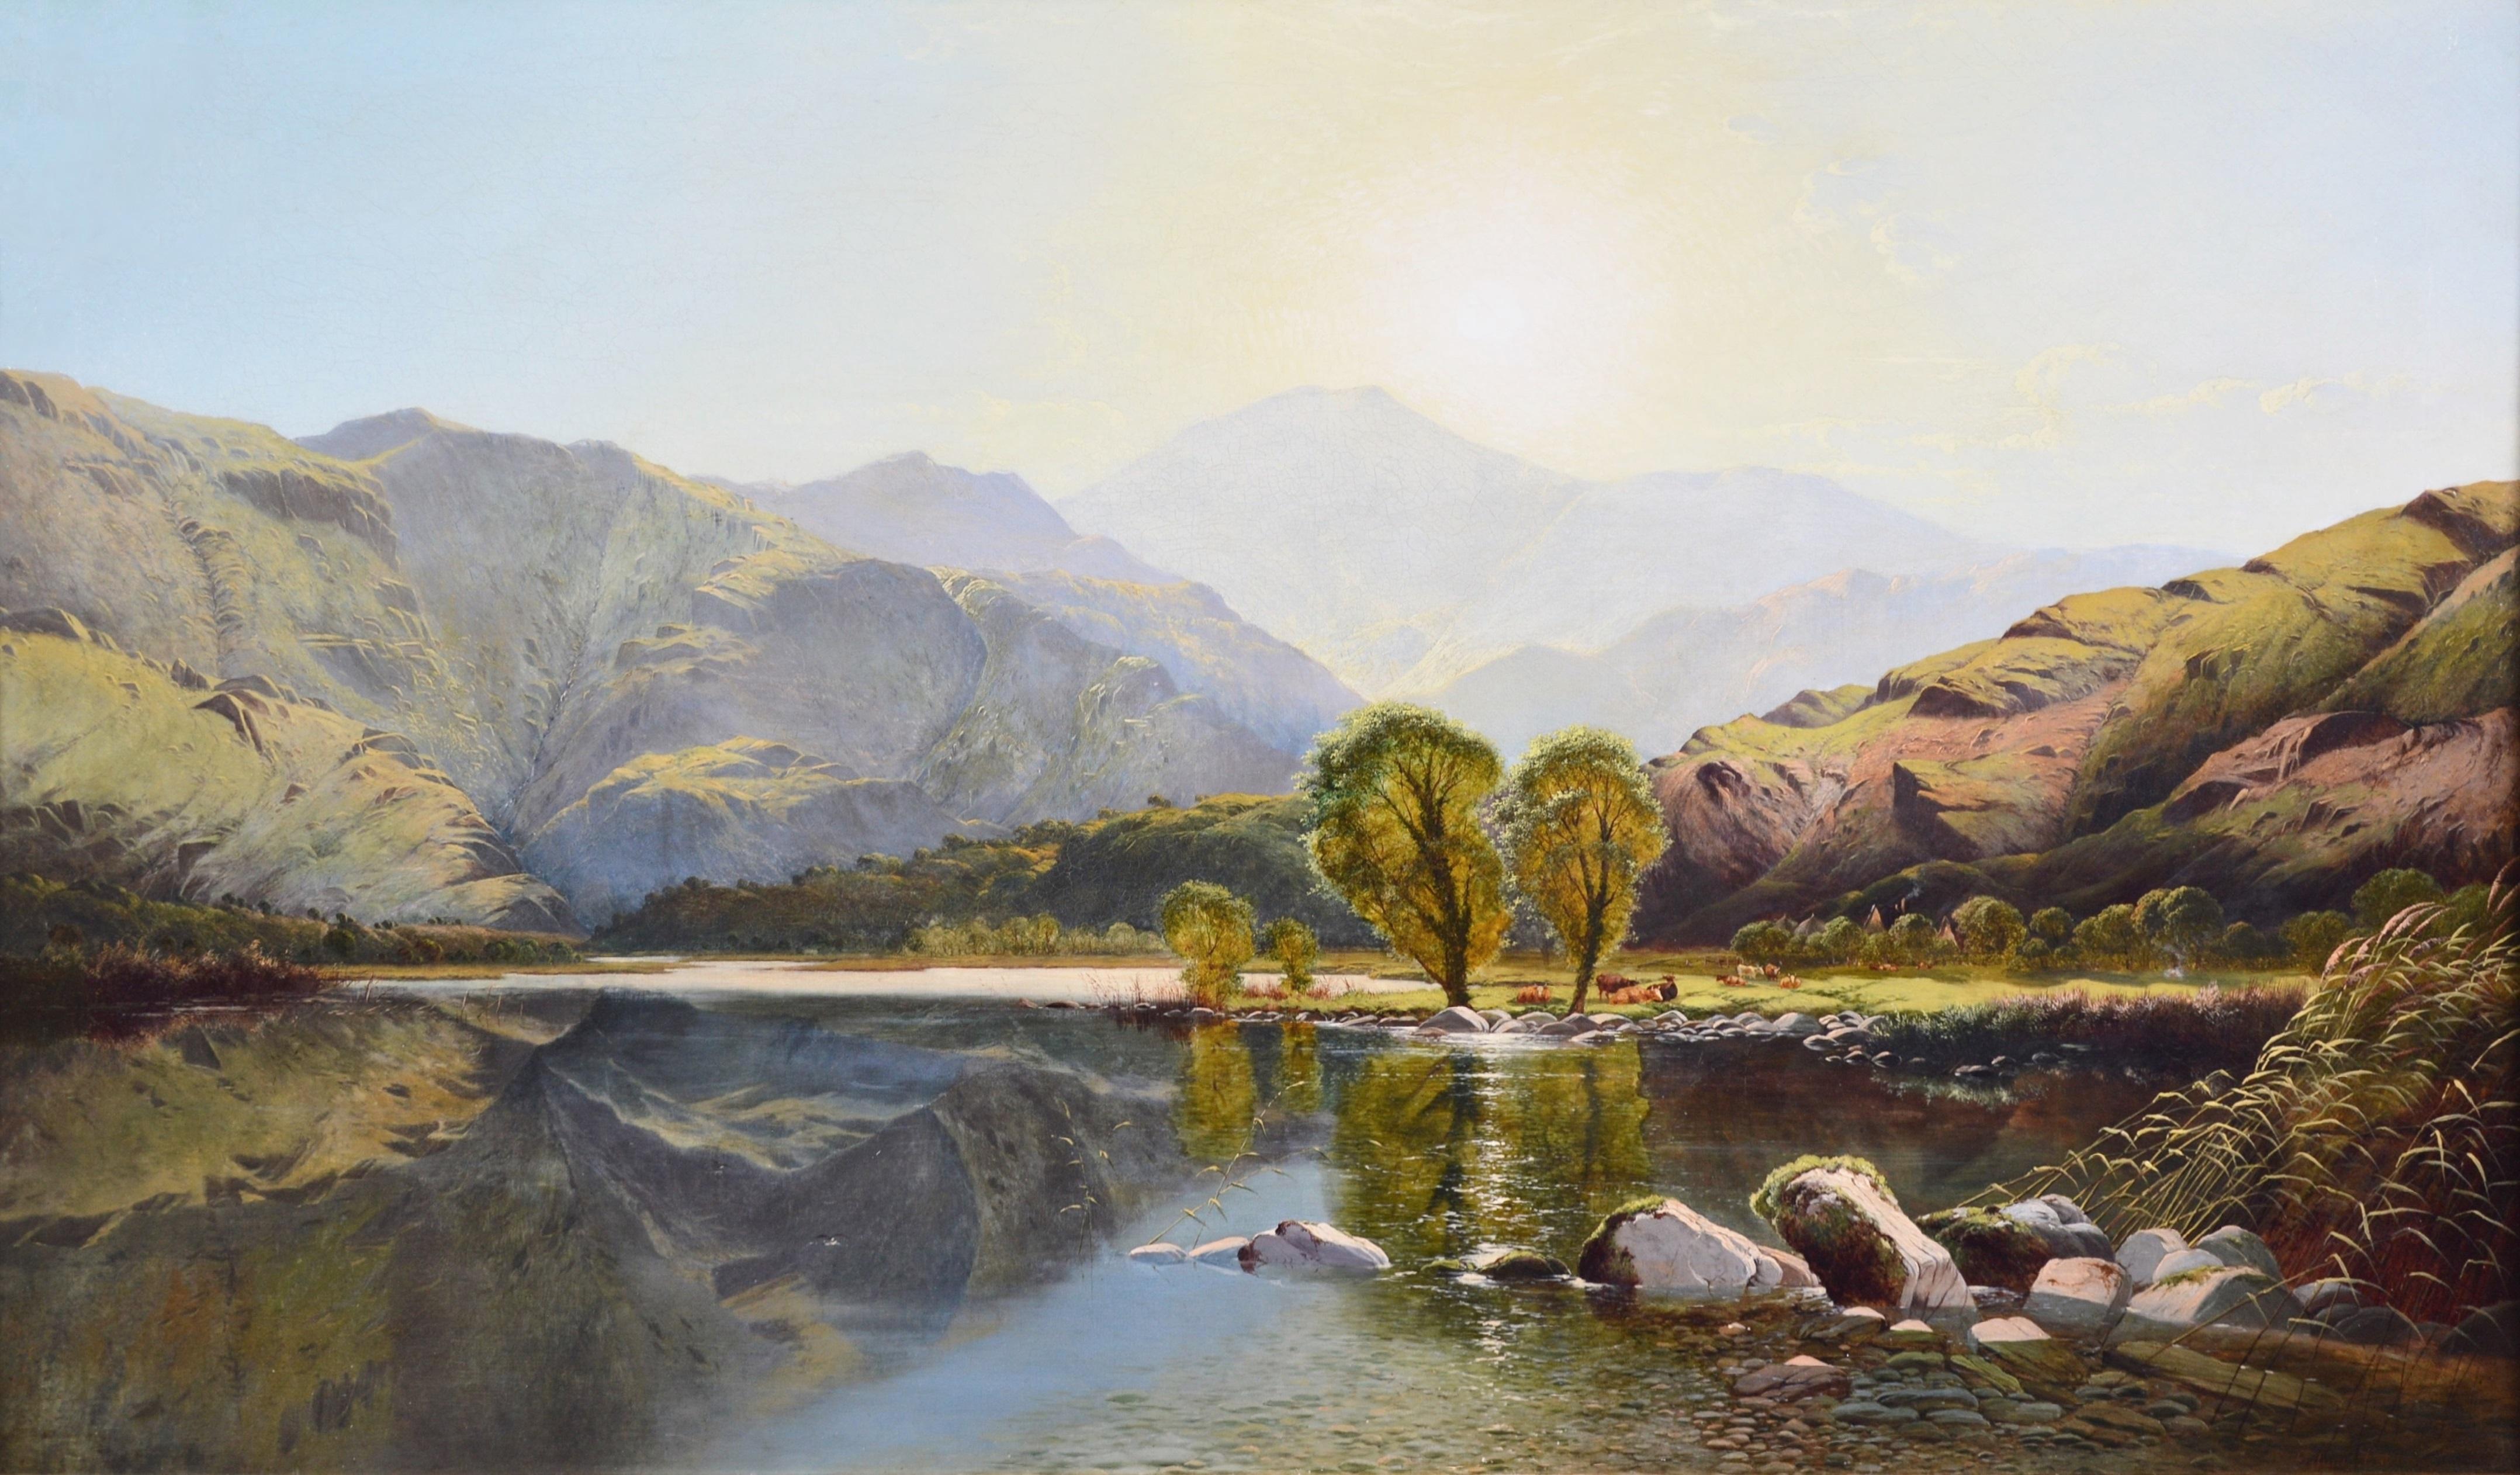 Sunrise in North Wales - Large 19th Century Exhibition Landscape Oil Painting 1